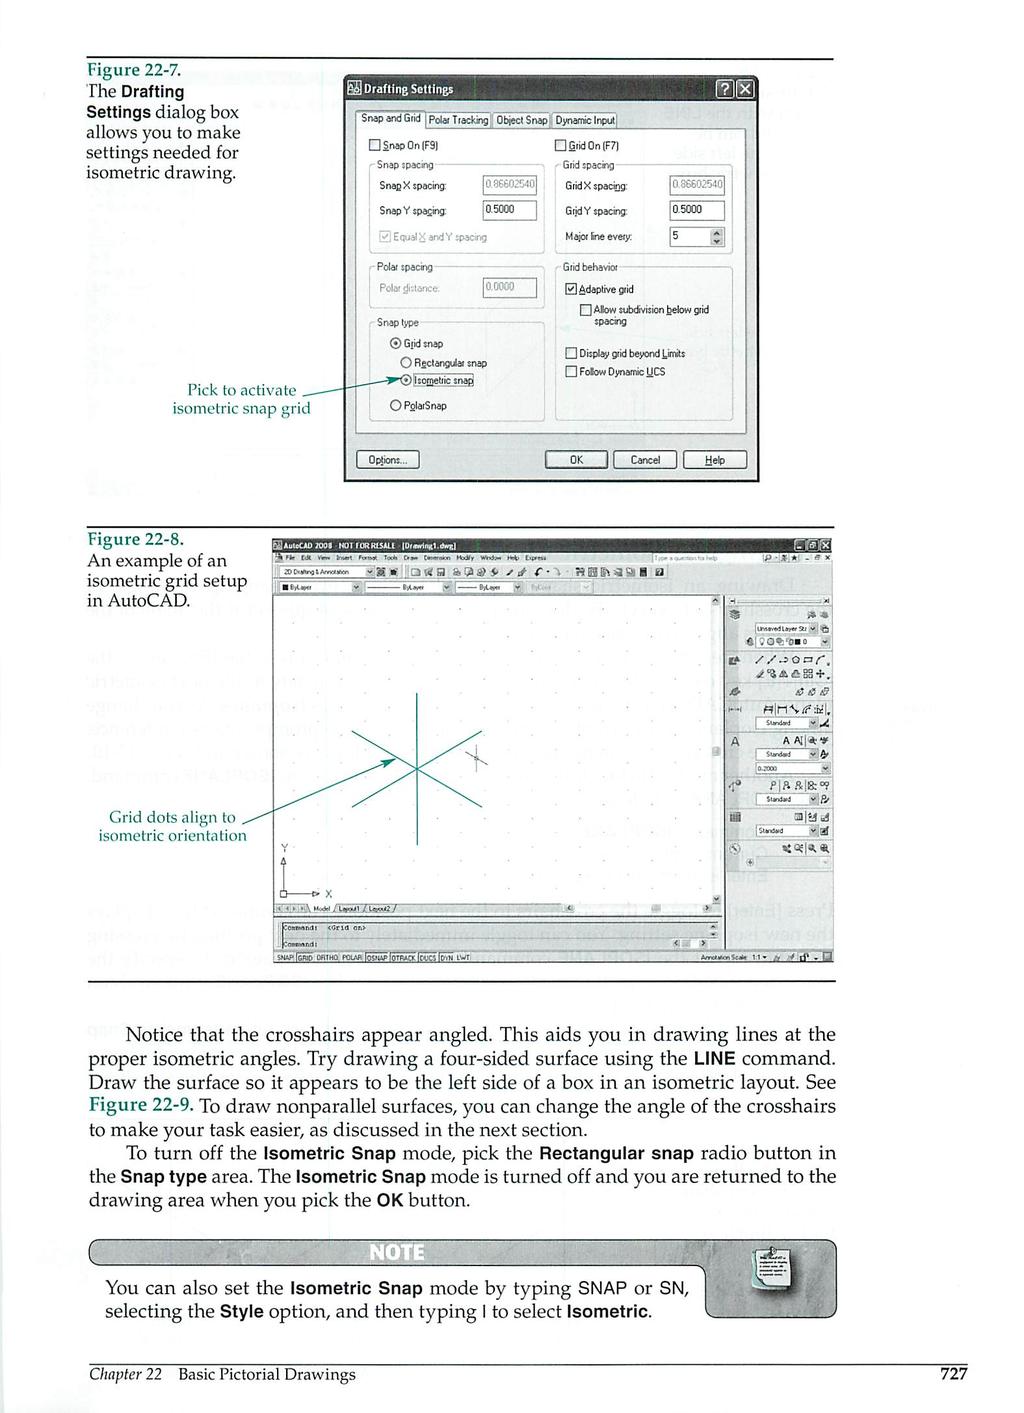 Figure 22-7. The Drafting Settings dialog box allows you to make settings needed for isometric drawing.